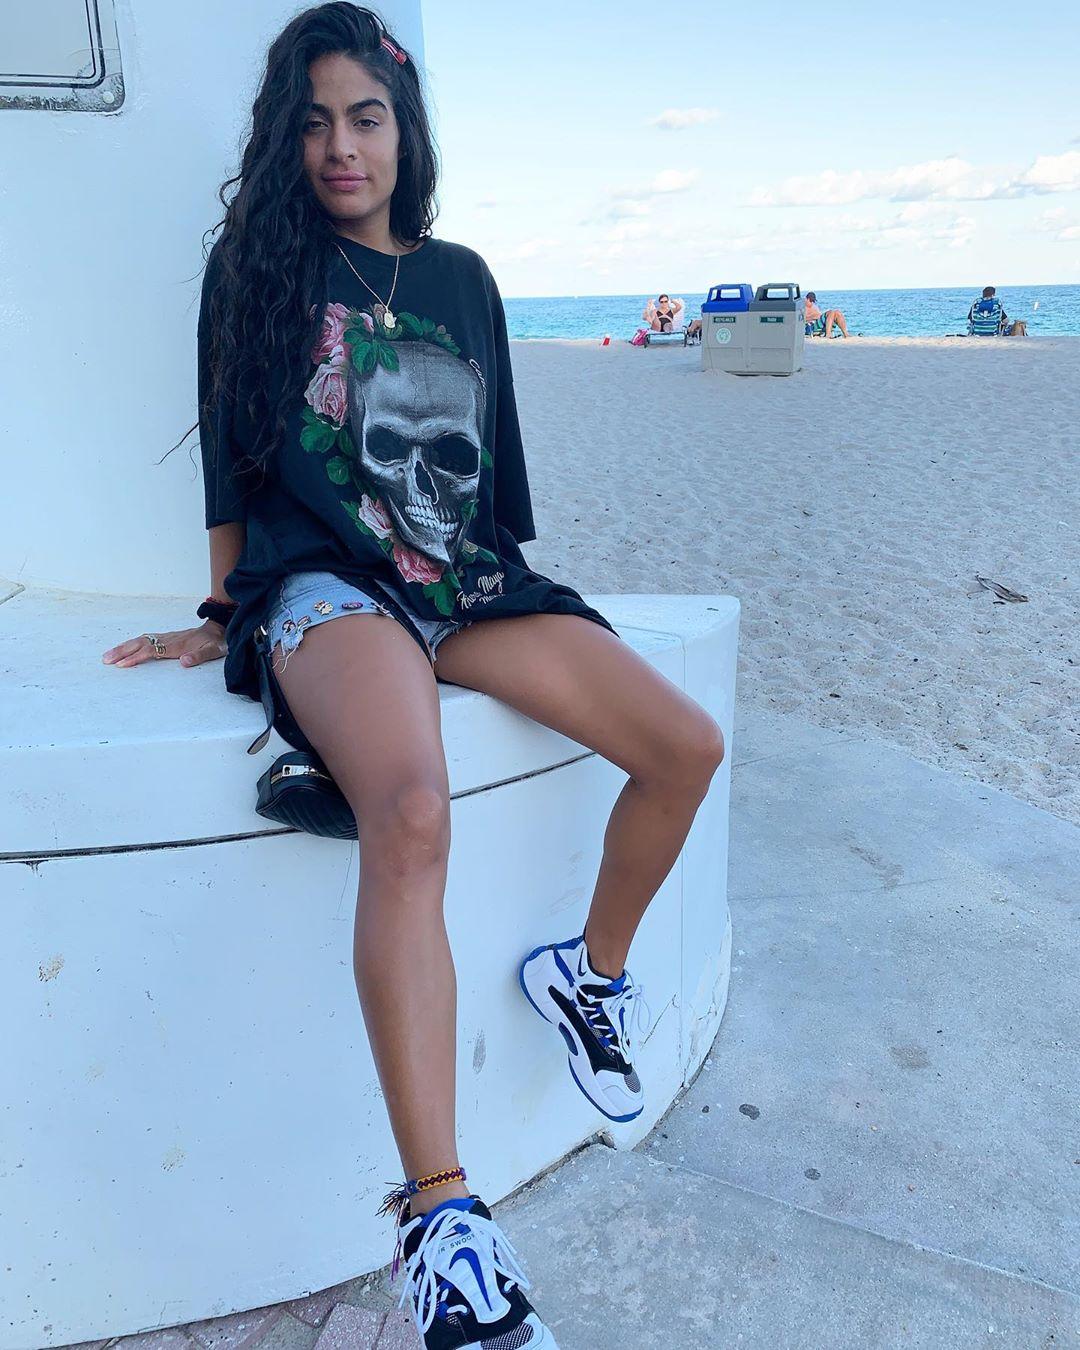 51 Hot Pictures Of Jessie Reyez Will Leave You Flabbergasted By Her Hot Magnificence 25